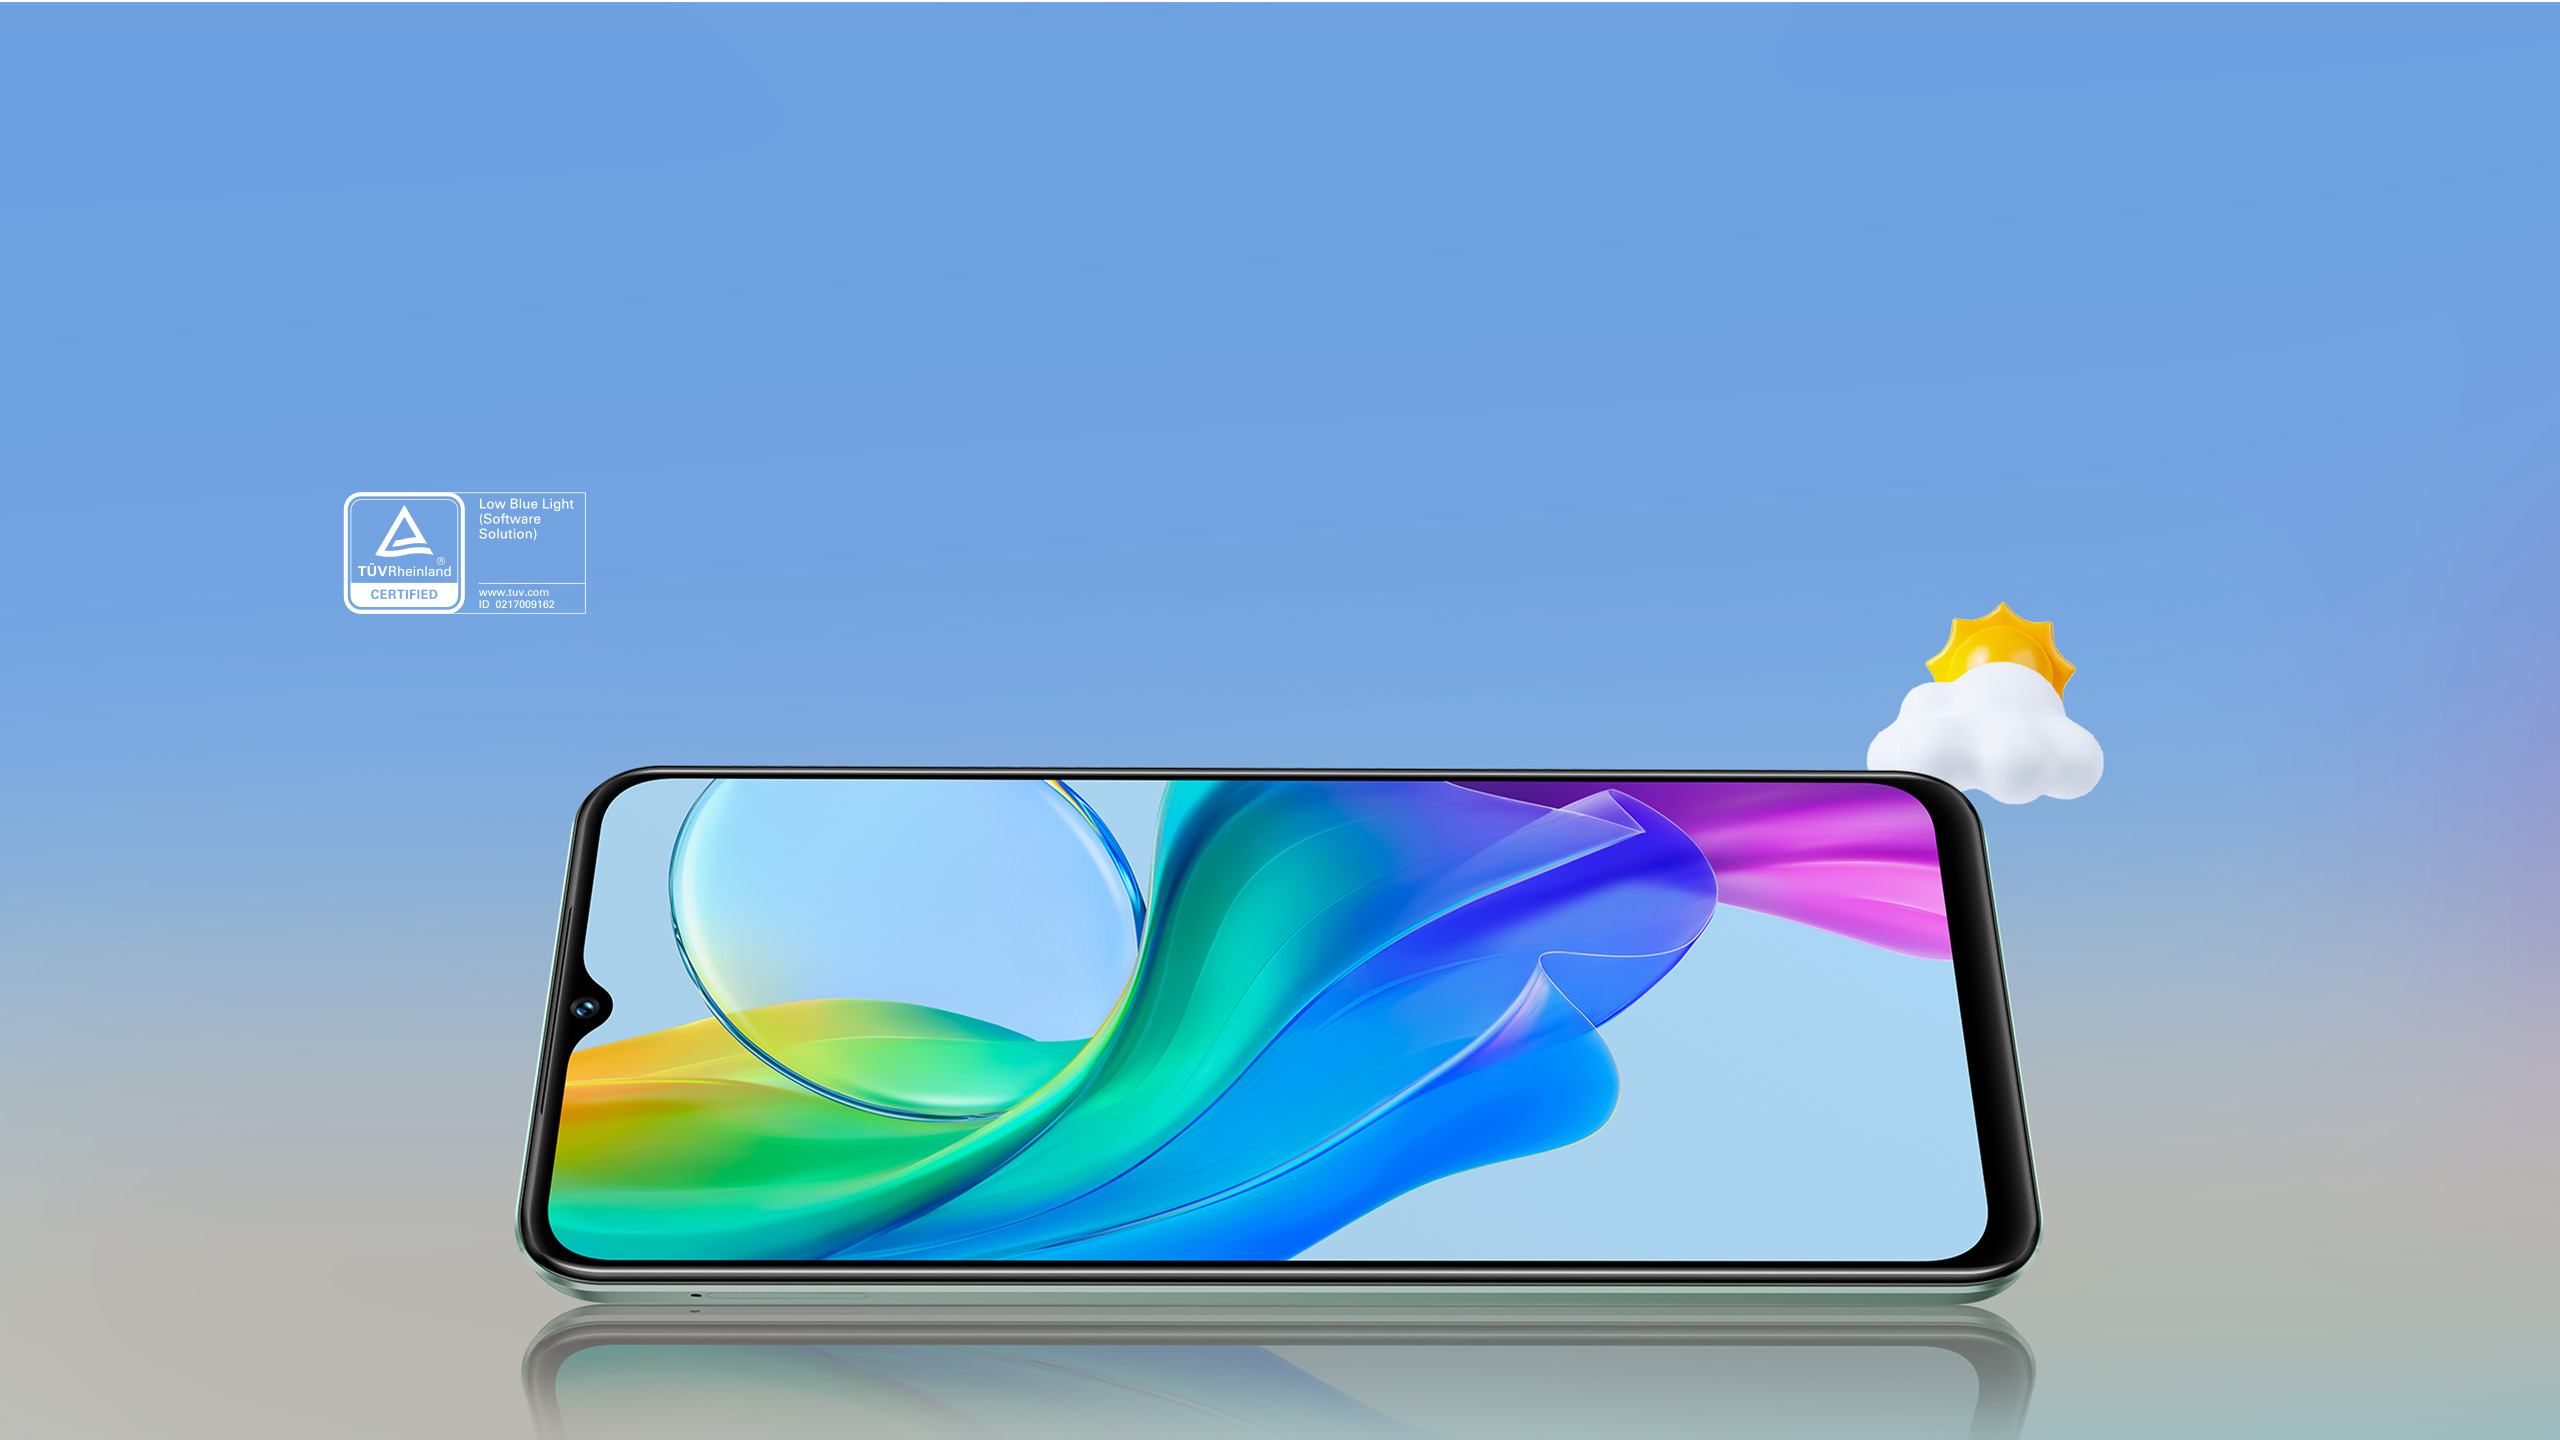 vivo Y03 with 6.56 inch sunlight display and 90Hz refresh rate